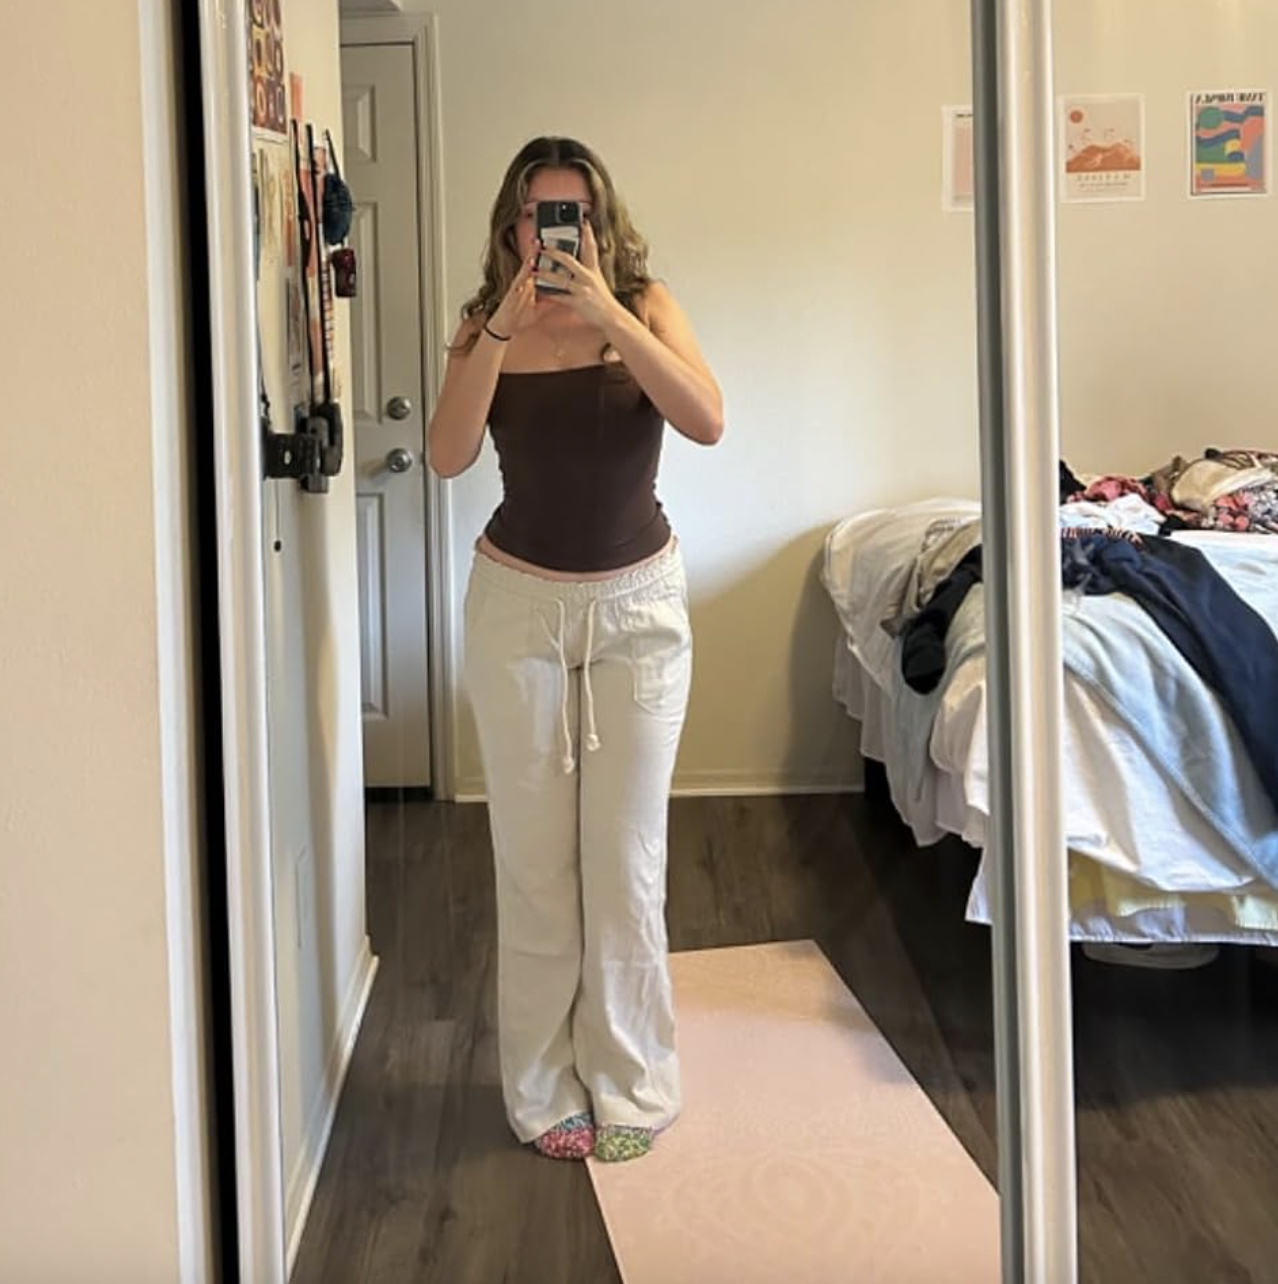 Person in mirror taking photo with phone, wearing a tank top and white pants, messy bed in background